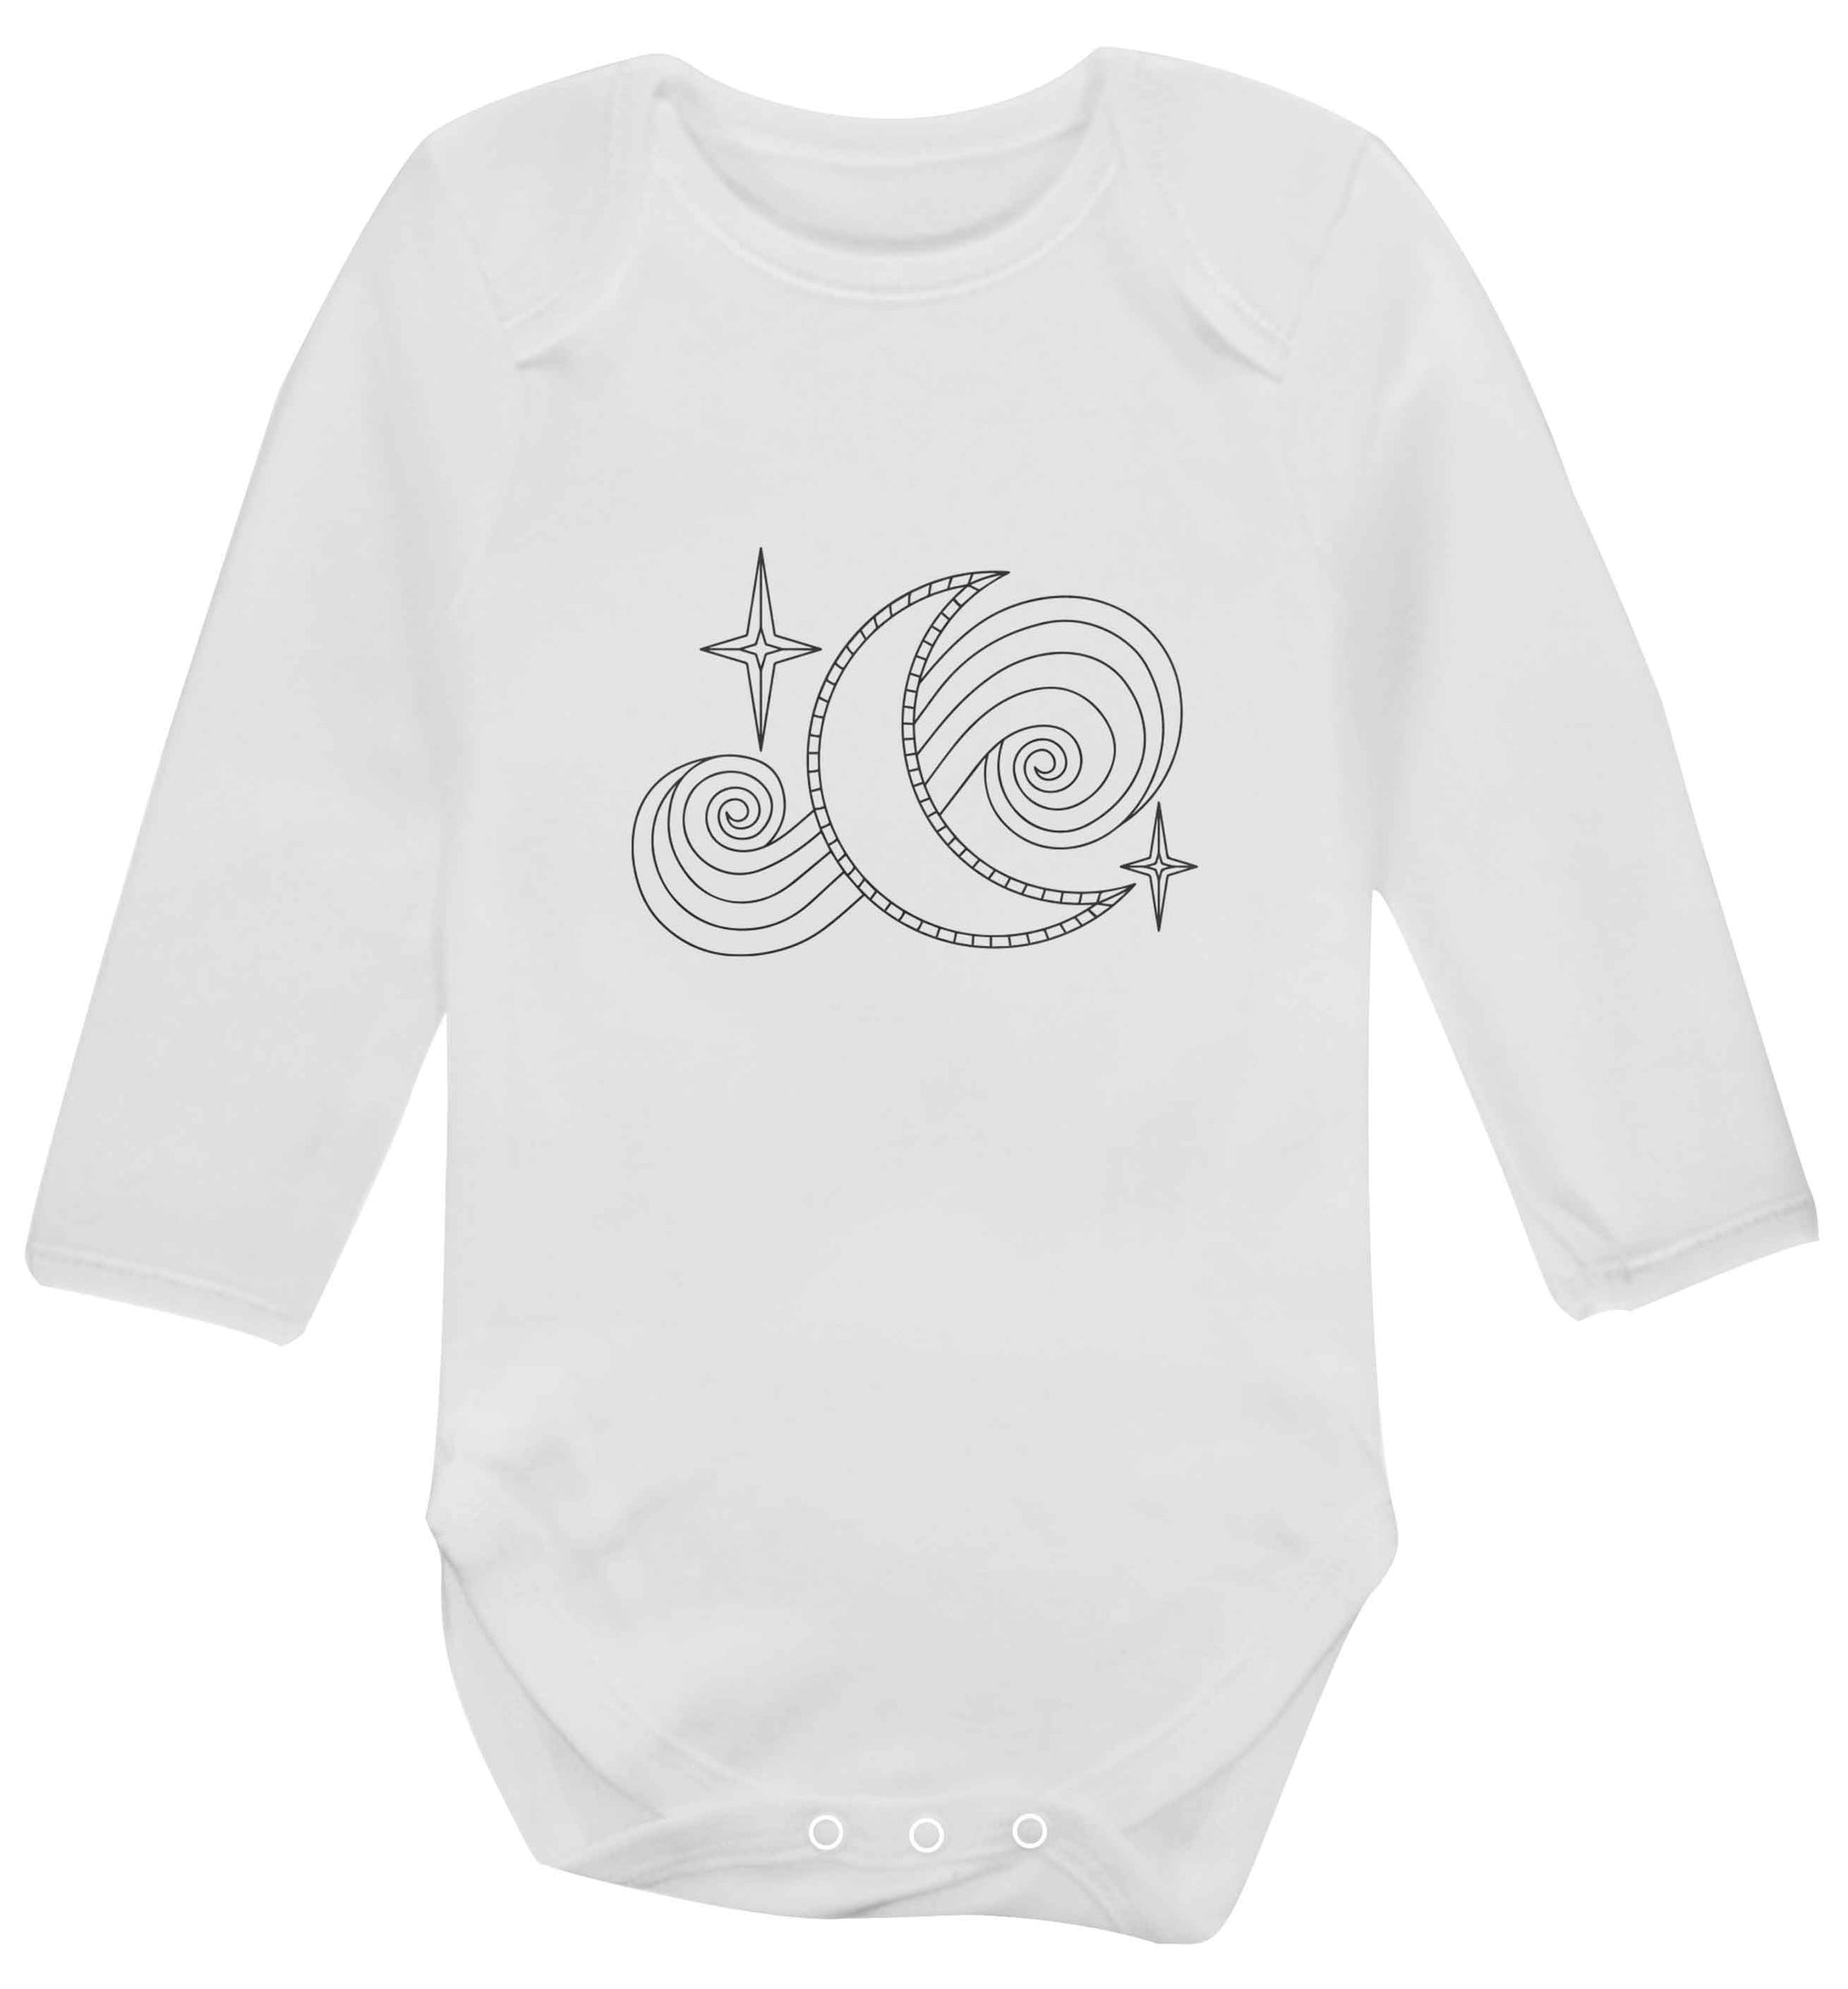 Moon and stars illustration baby vest long sleeved white 6-12 months